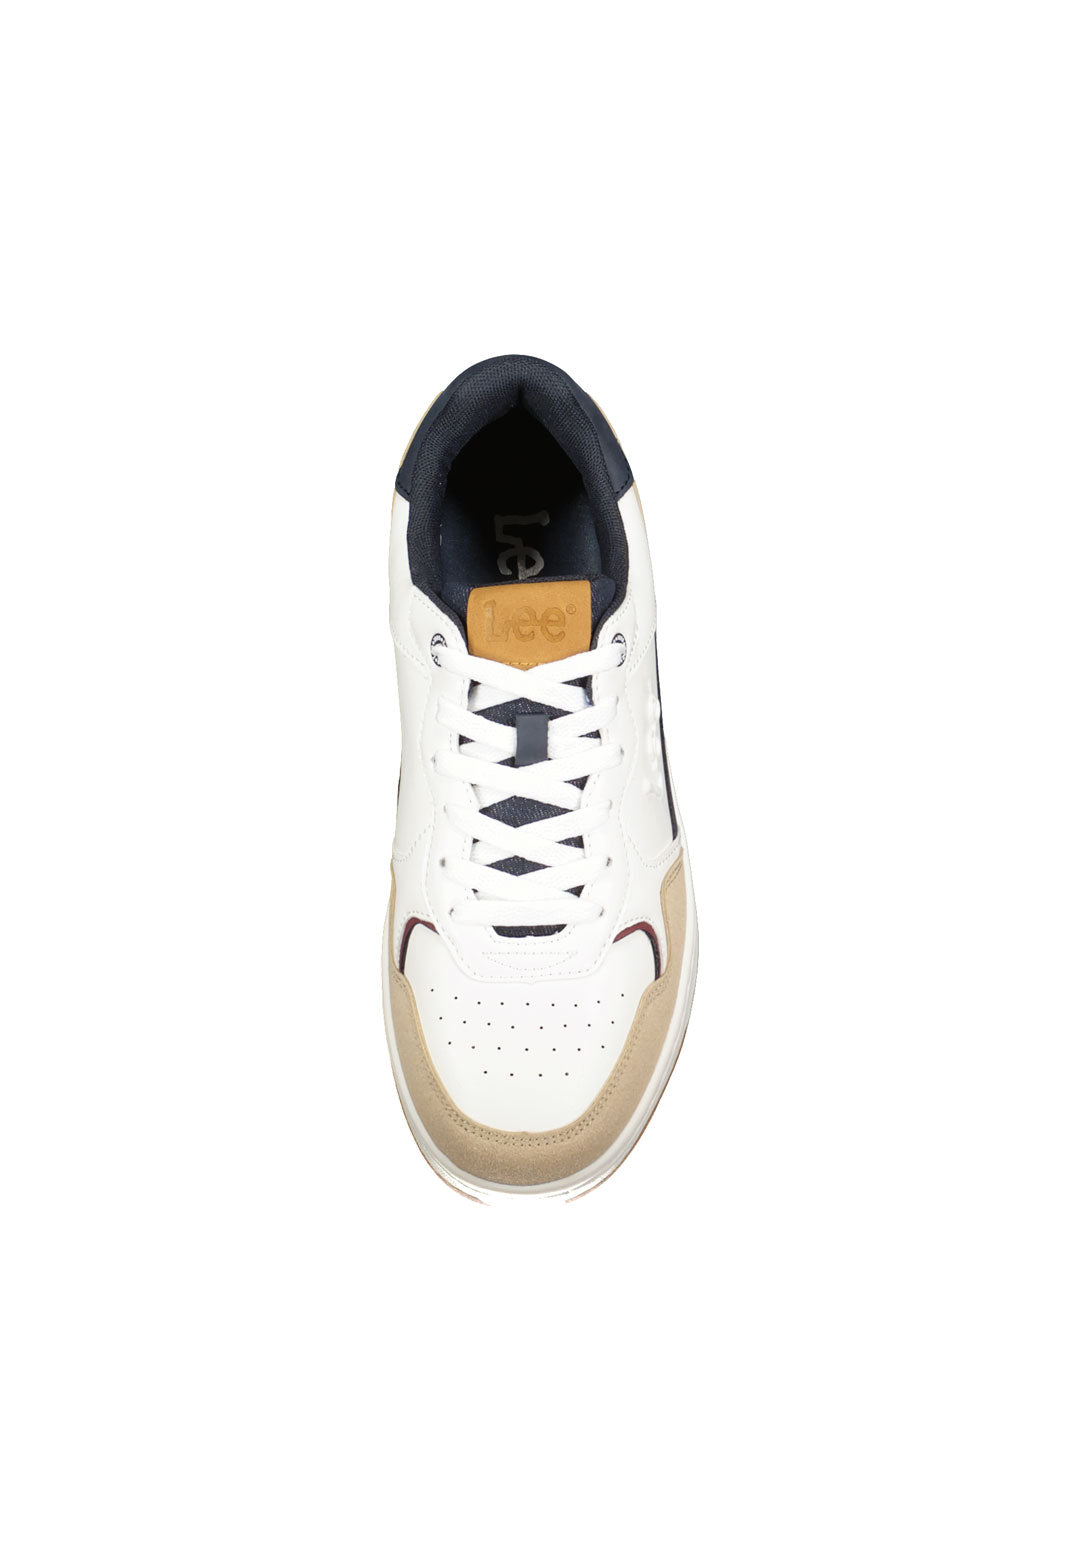 Craig Low in Bright White/ Dress Blues Sneakers Lee   